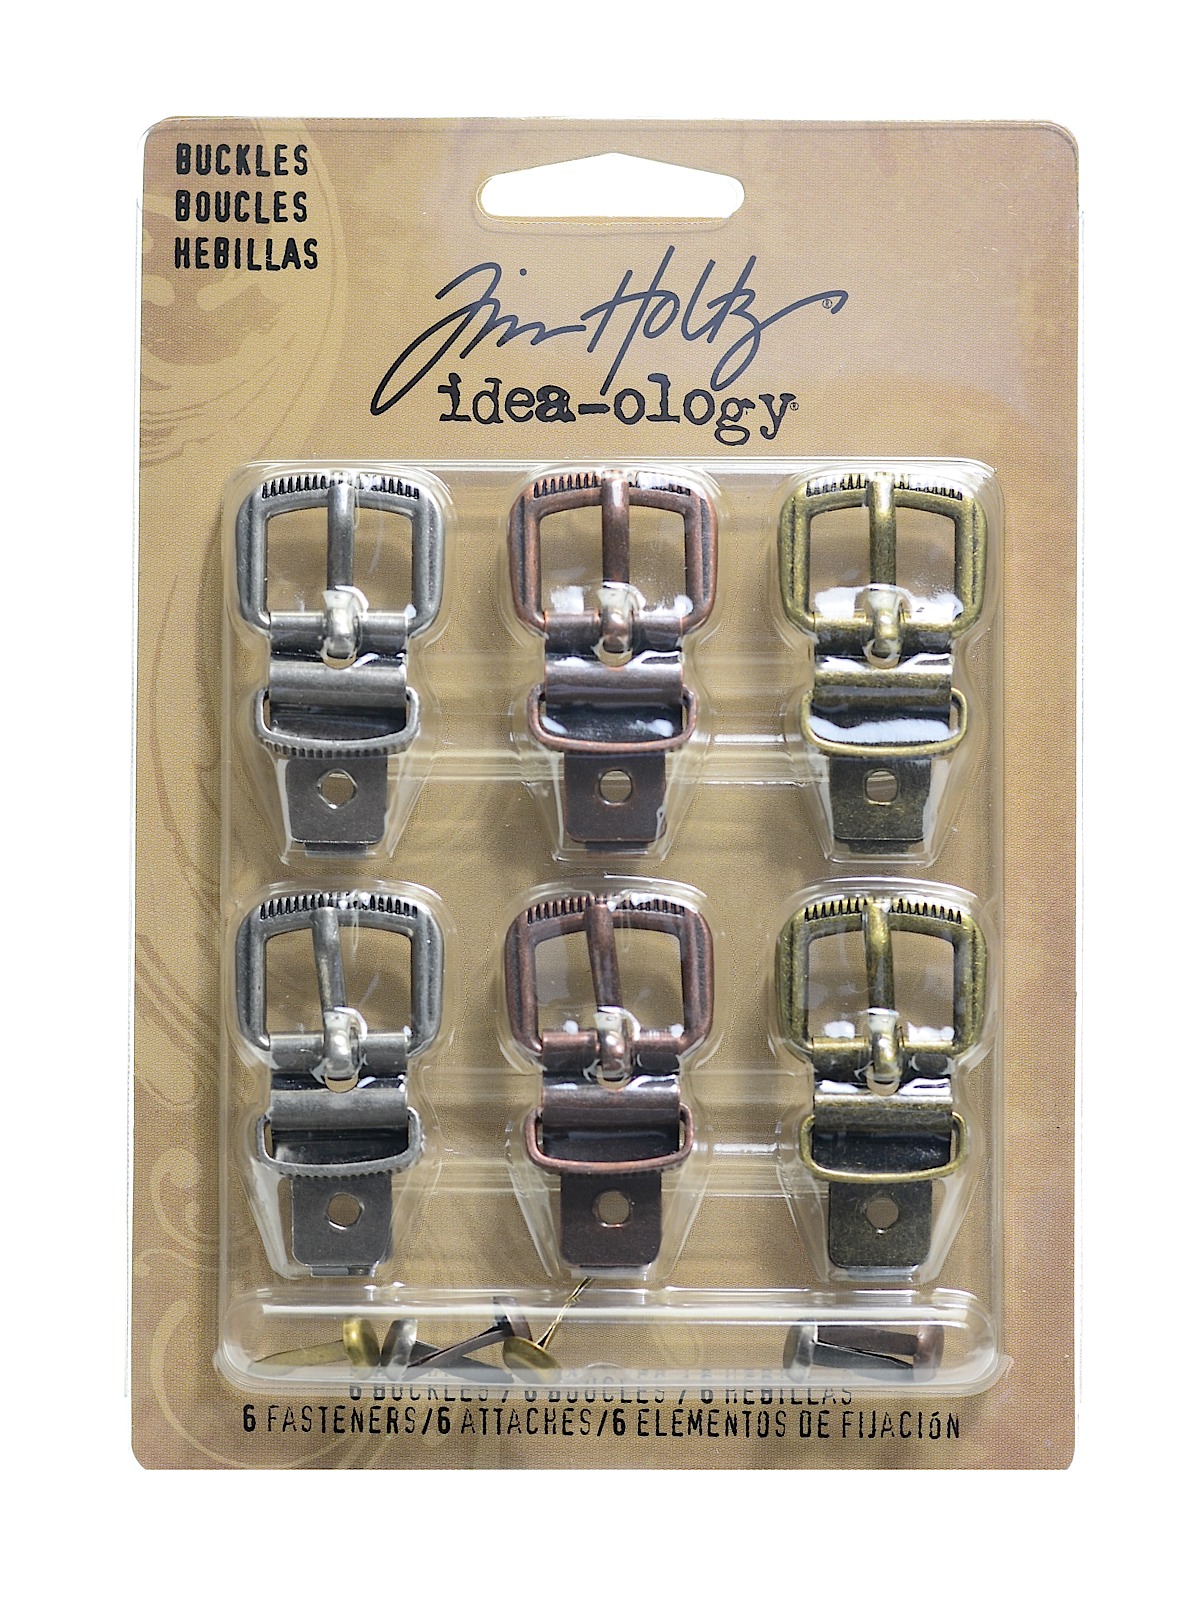 Idea-ology Fasteners Pack Of 6, 6 Fasteners Buckles